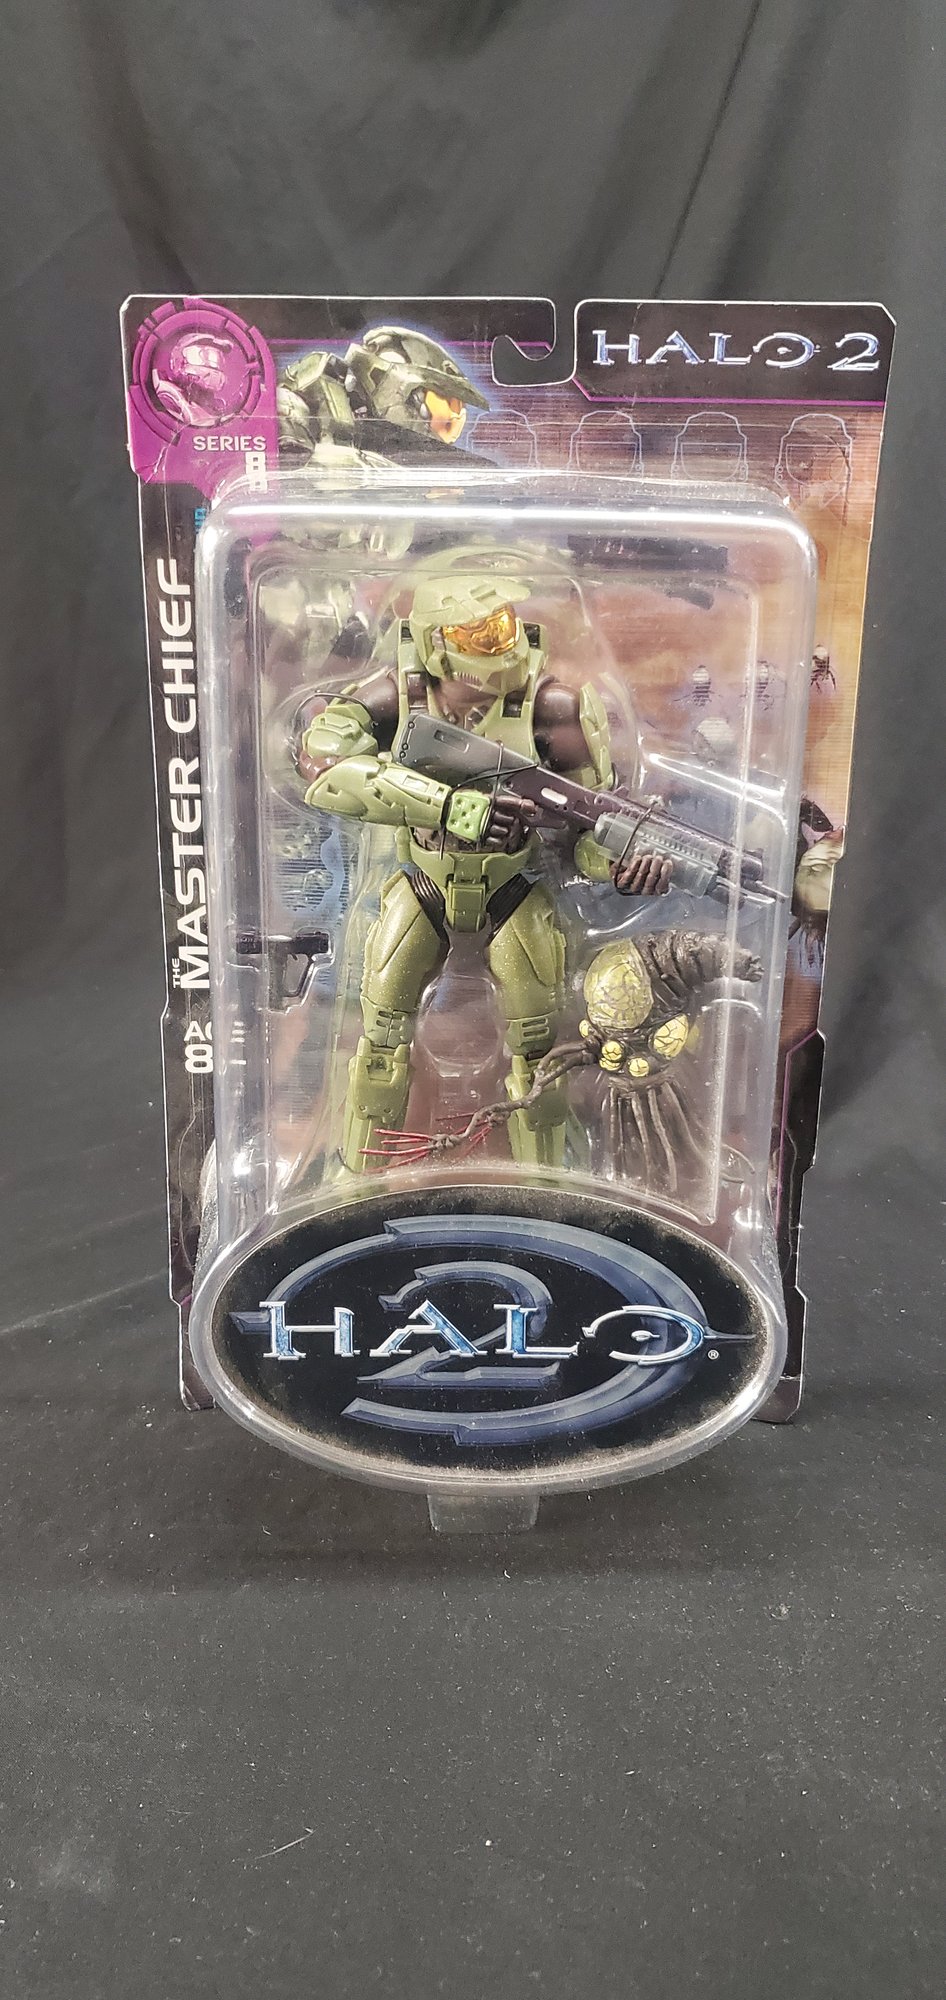 Halo 2 (Serie 8) - Master Chief with Flood Infection Form